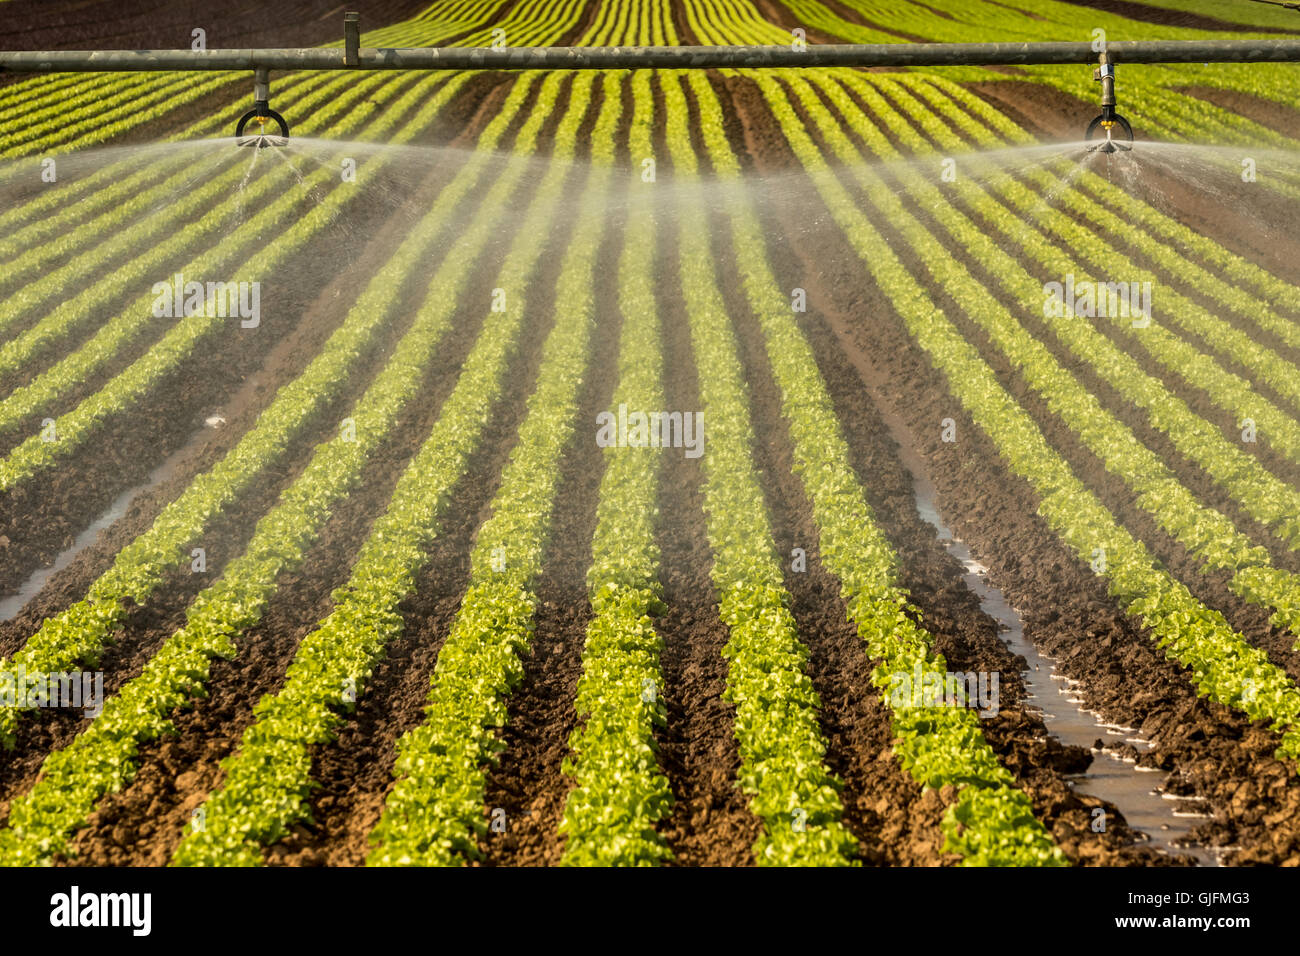 Modern agriculture with sprinklers above salad field Stock Photo